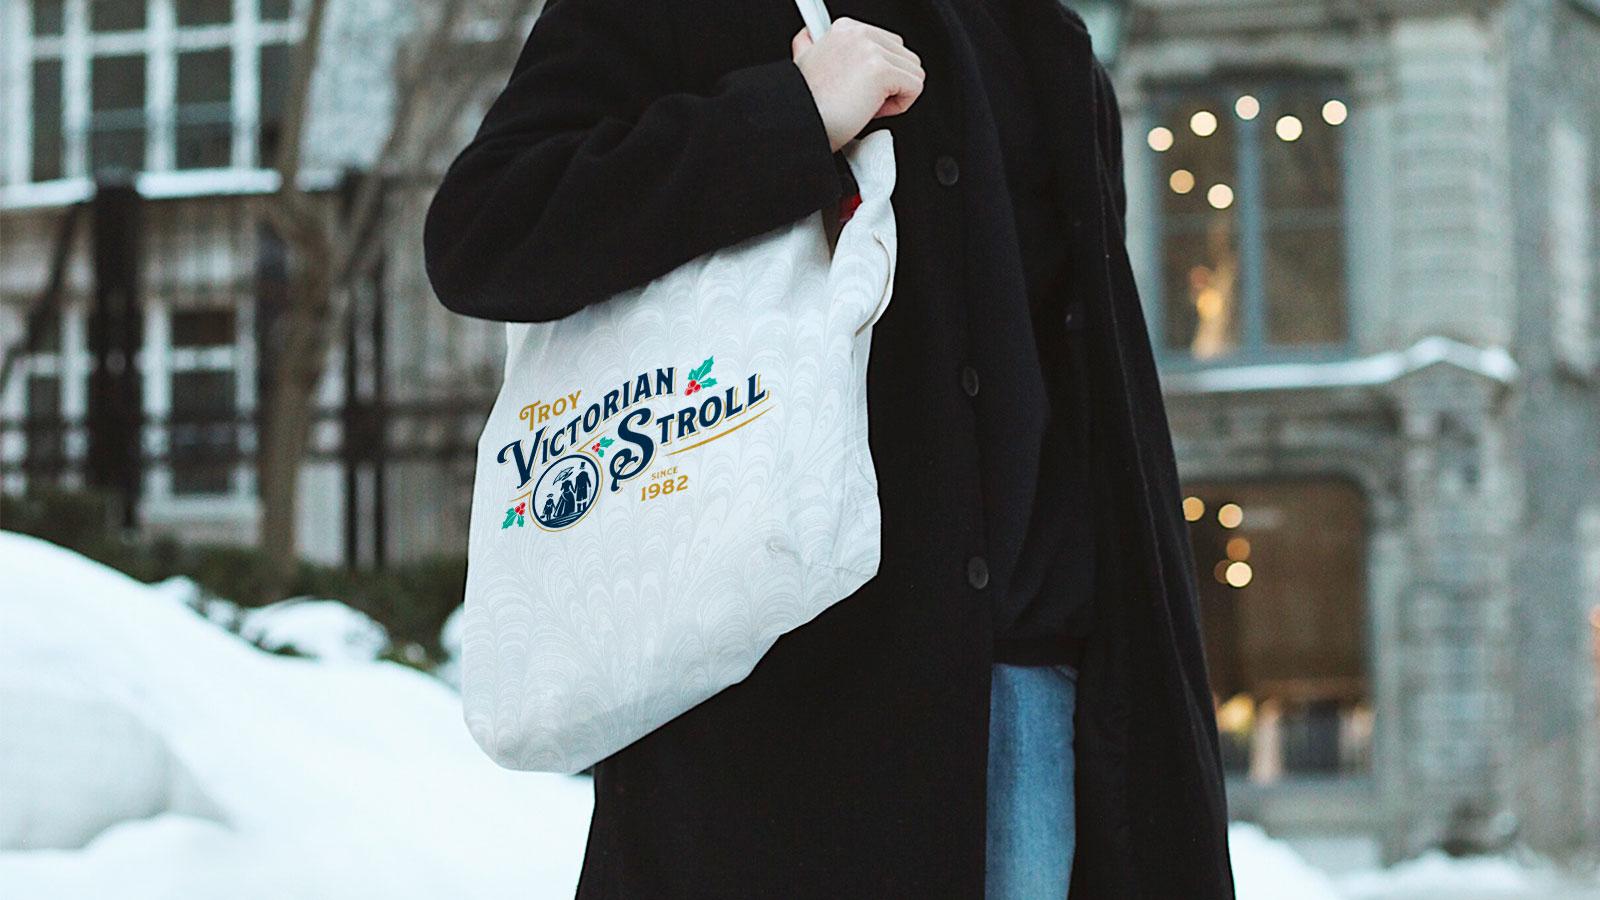 Troy Victorian Stroll | Tote Bag